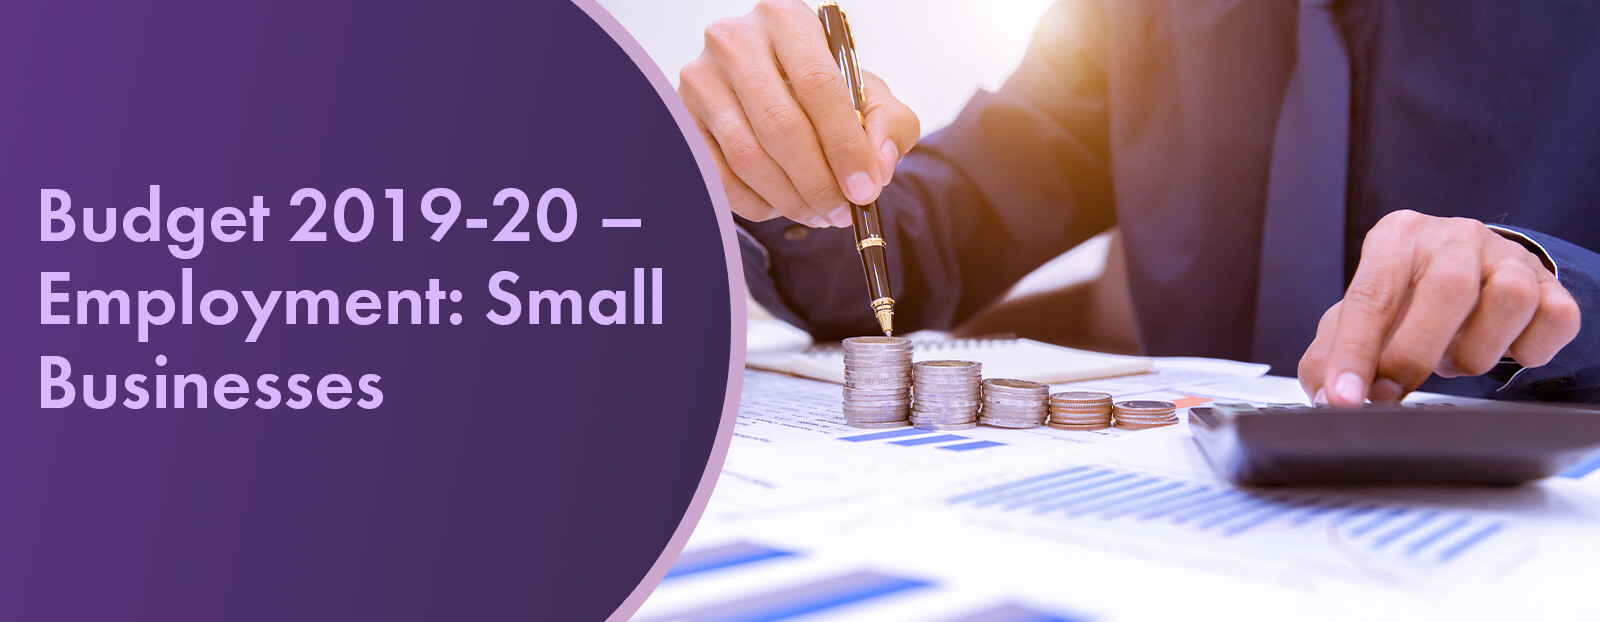 Budget 2019-20 – Employment: Small Businesses